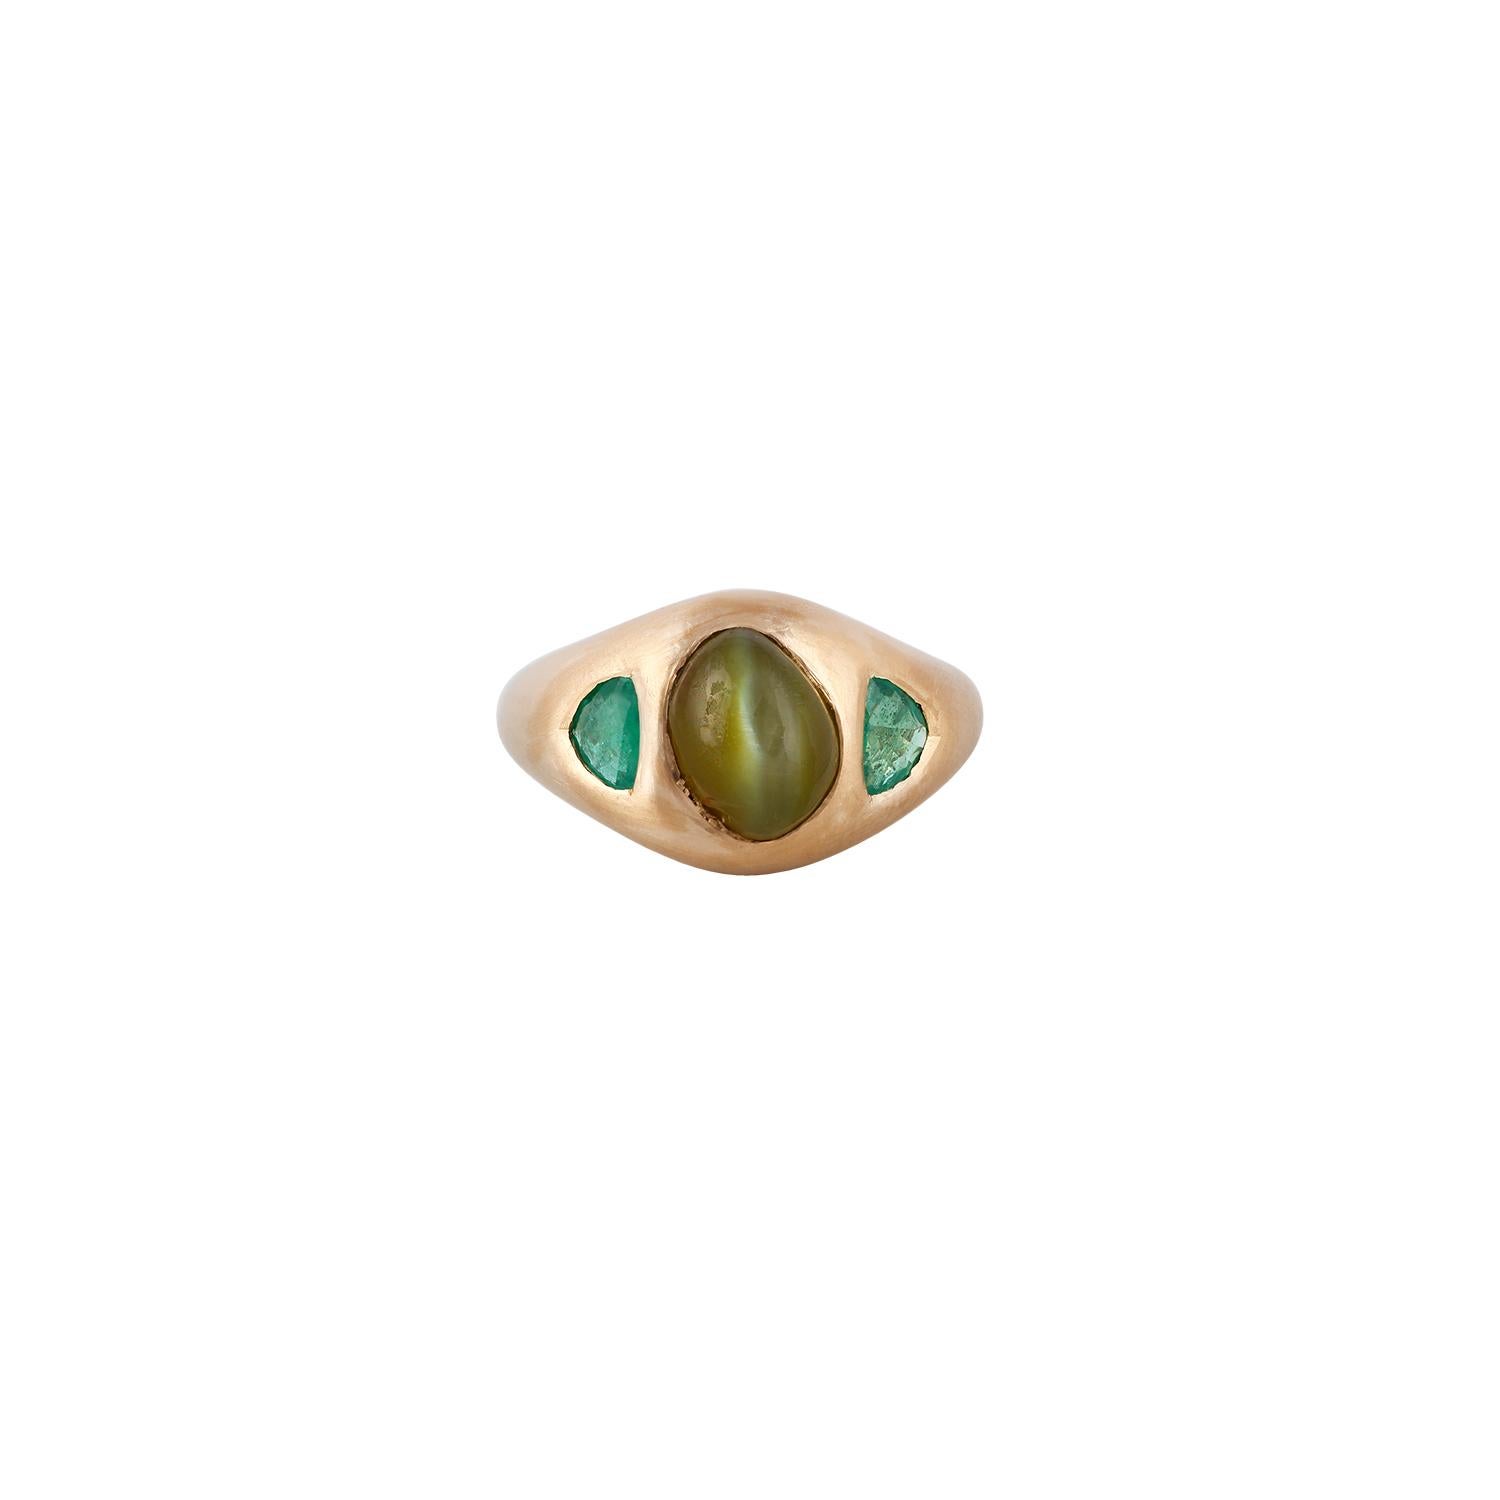 Cats Eye & Emerald Surrounded By Matte Finish 18k Yellow Gold Ring


Cats Eye - 4.94 CTS
Emerald  - 0.61 CTS

Matte Finish 18k Yellow Gold

Custom Services
Resizing is available.
Request Customization

size - 6.5




